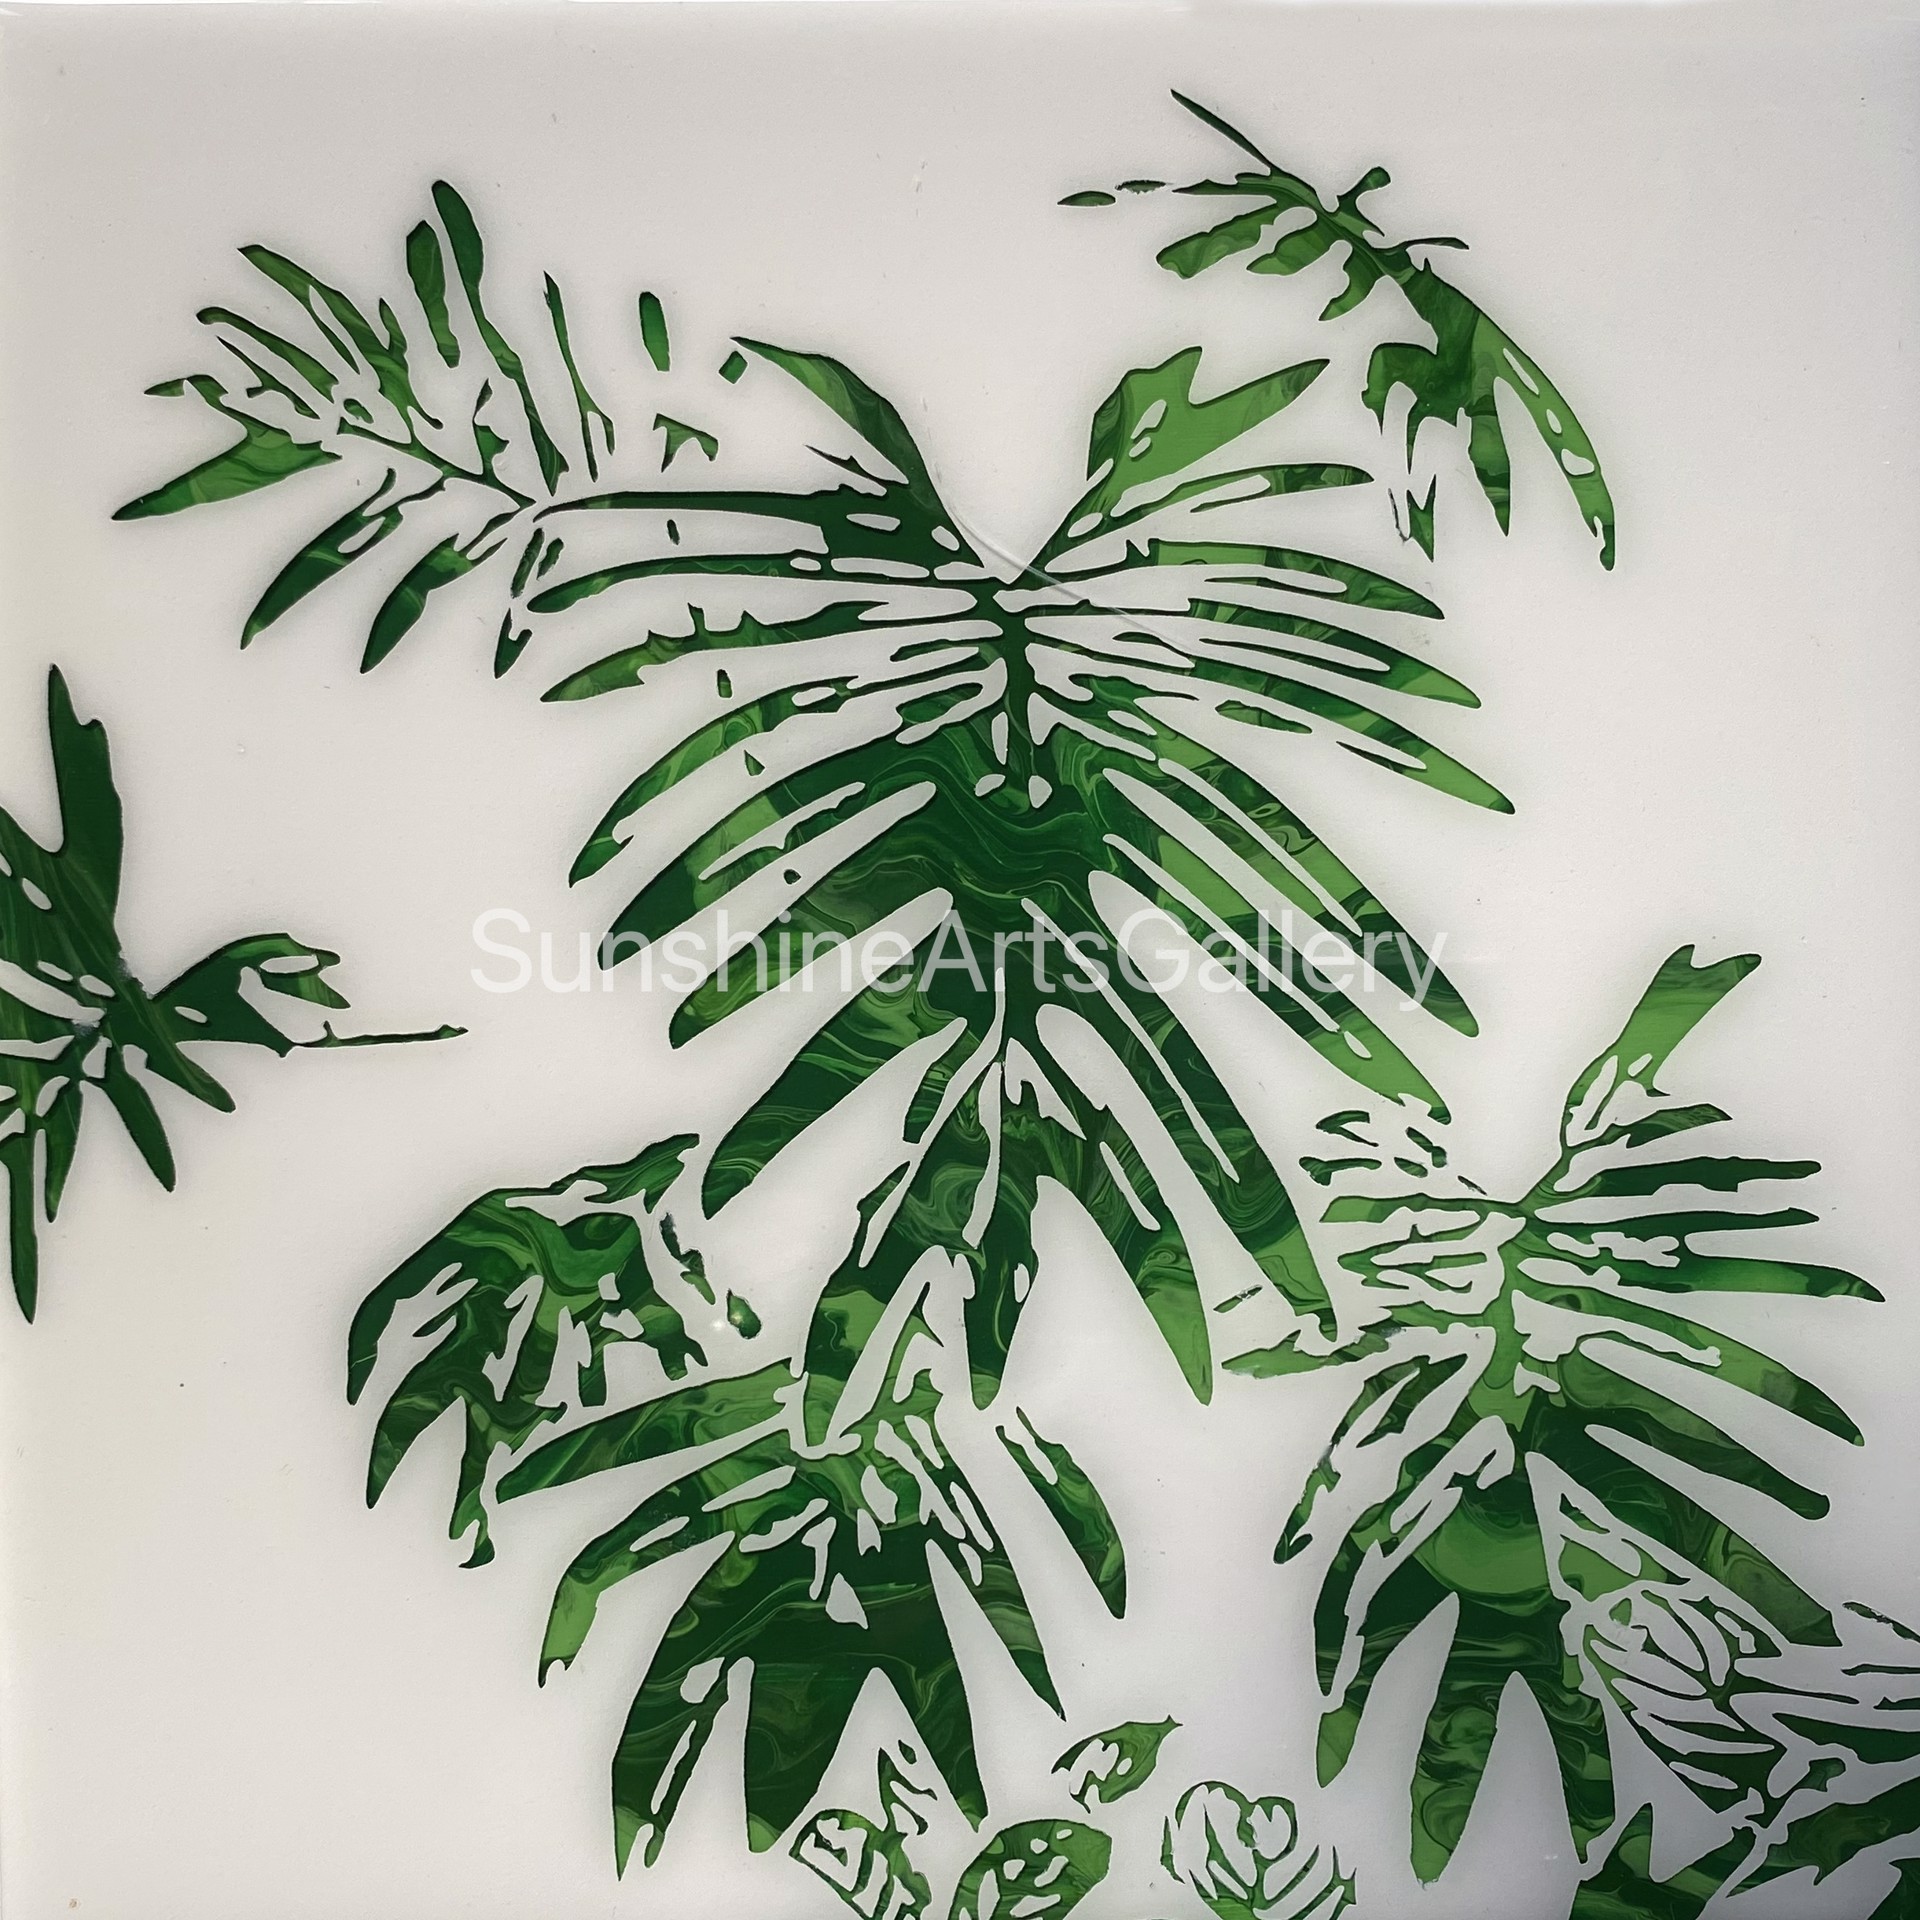 Philodendrons with Calatheas by Pati O'Neal